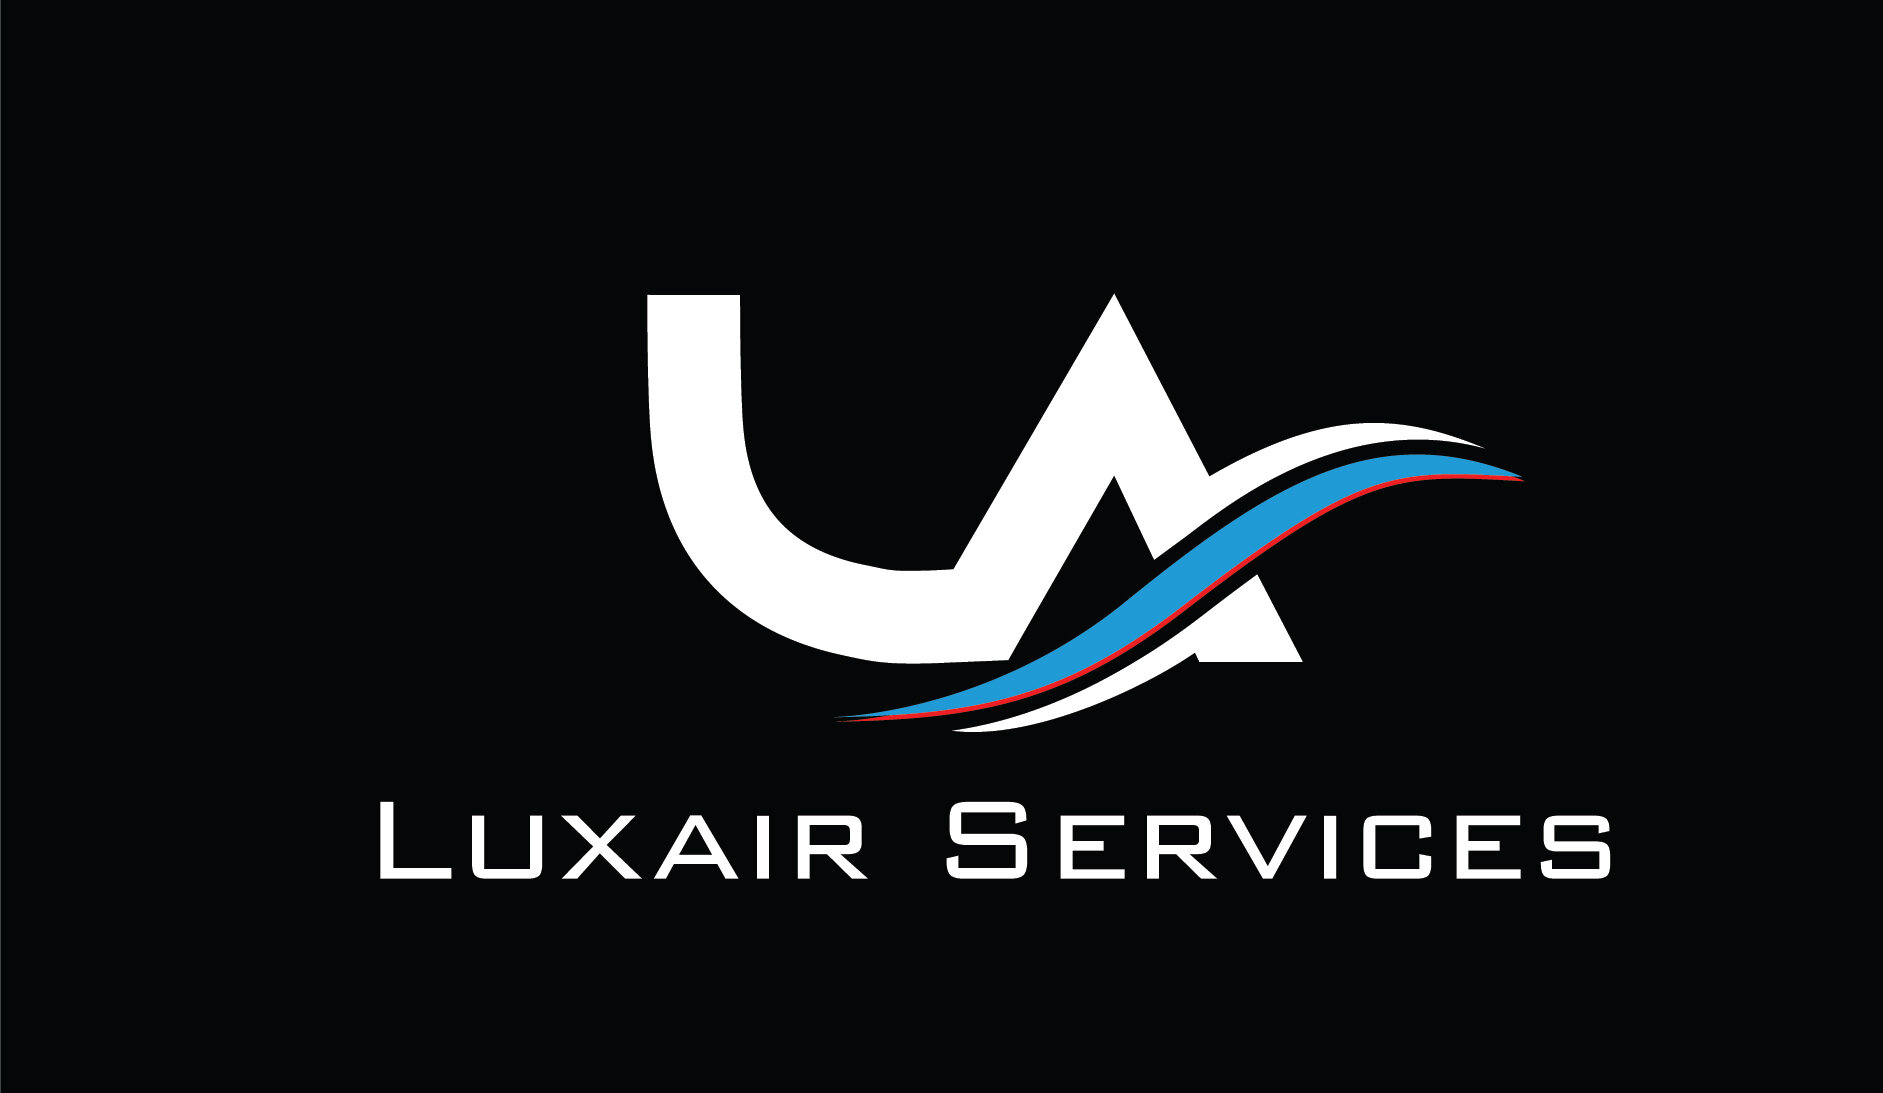 Luxair Services